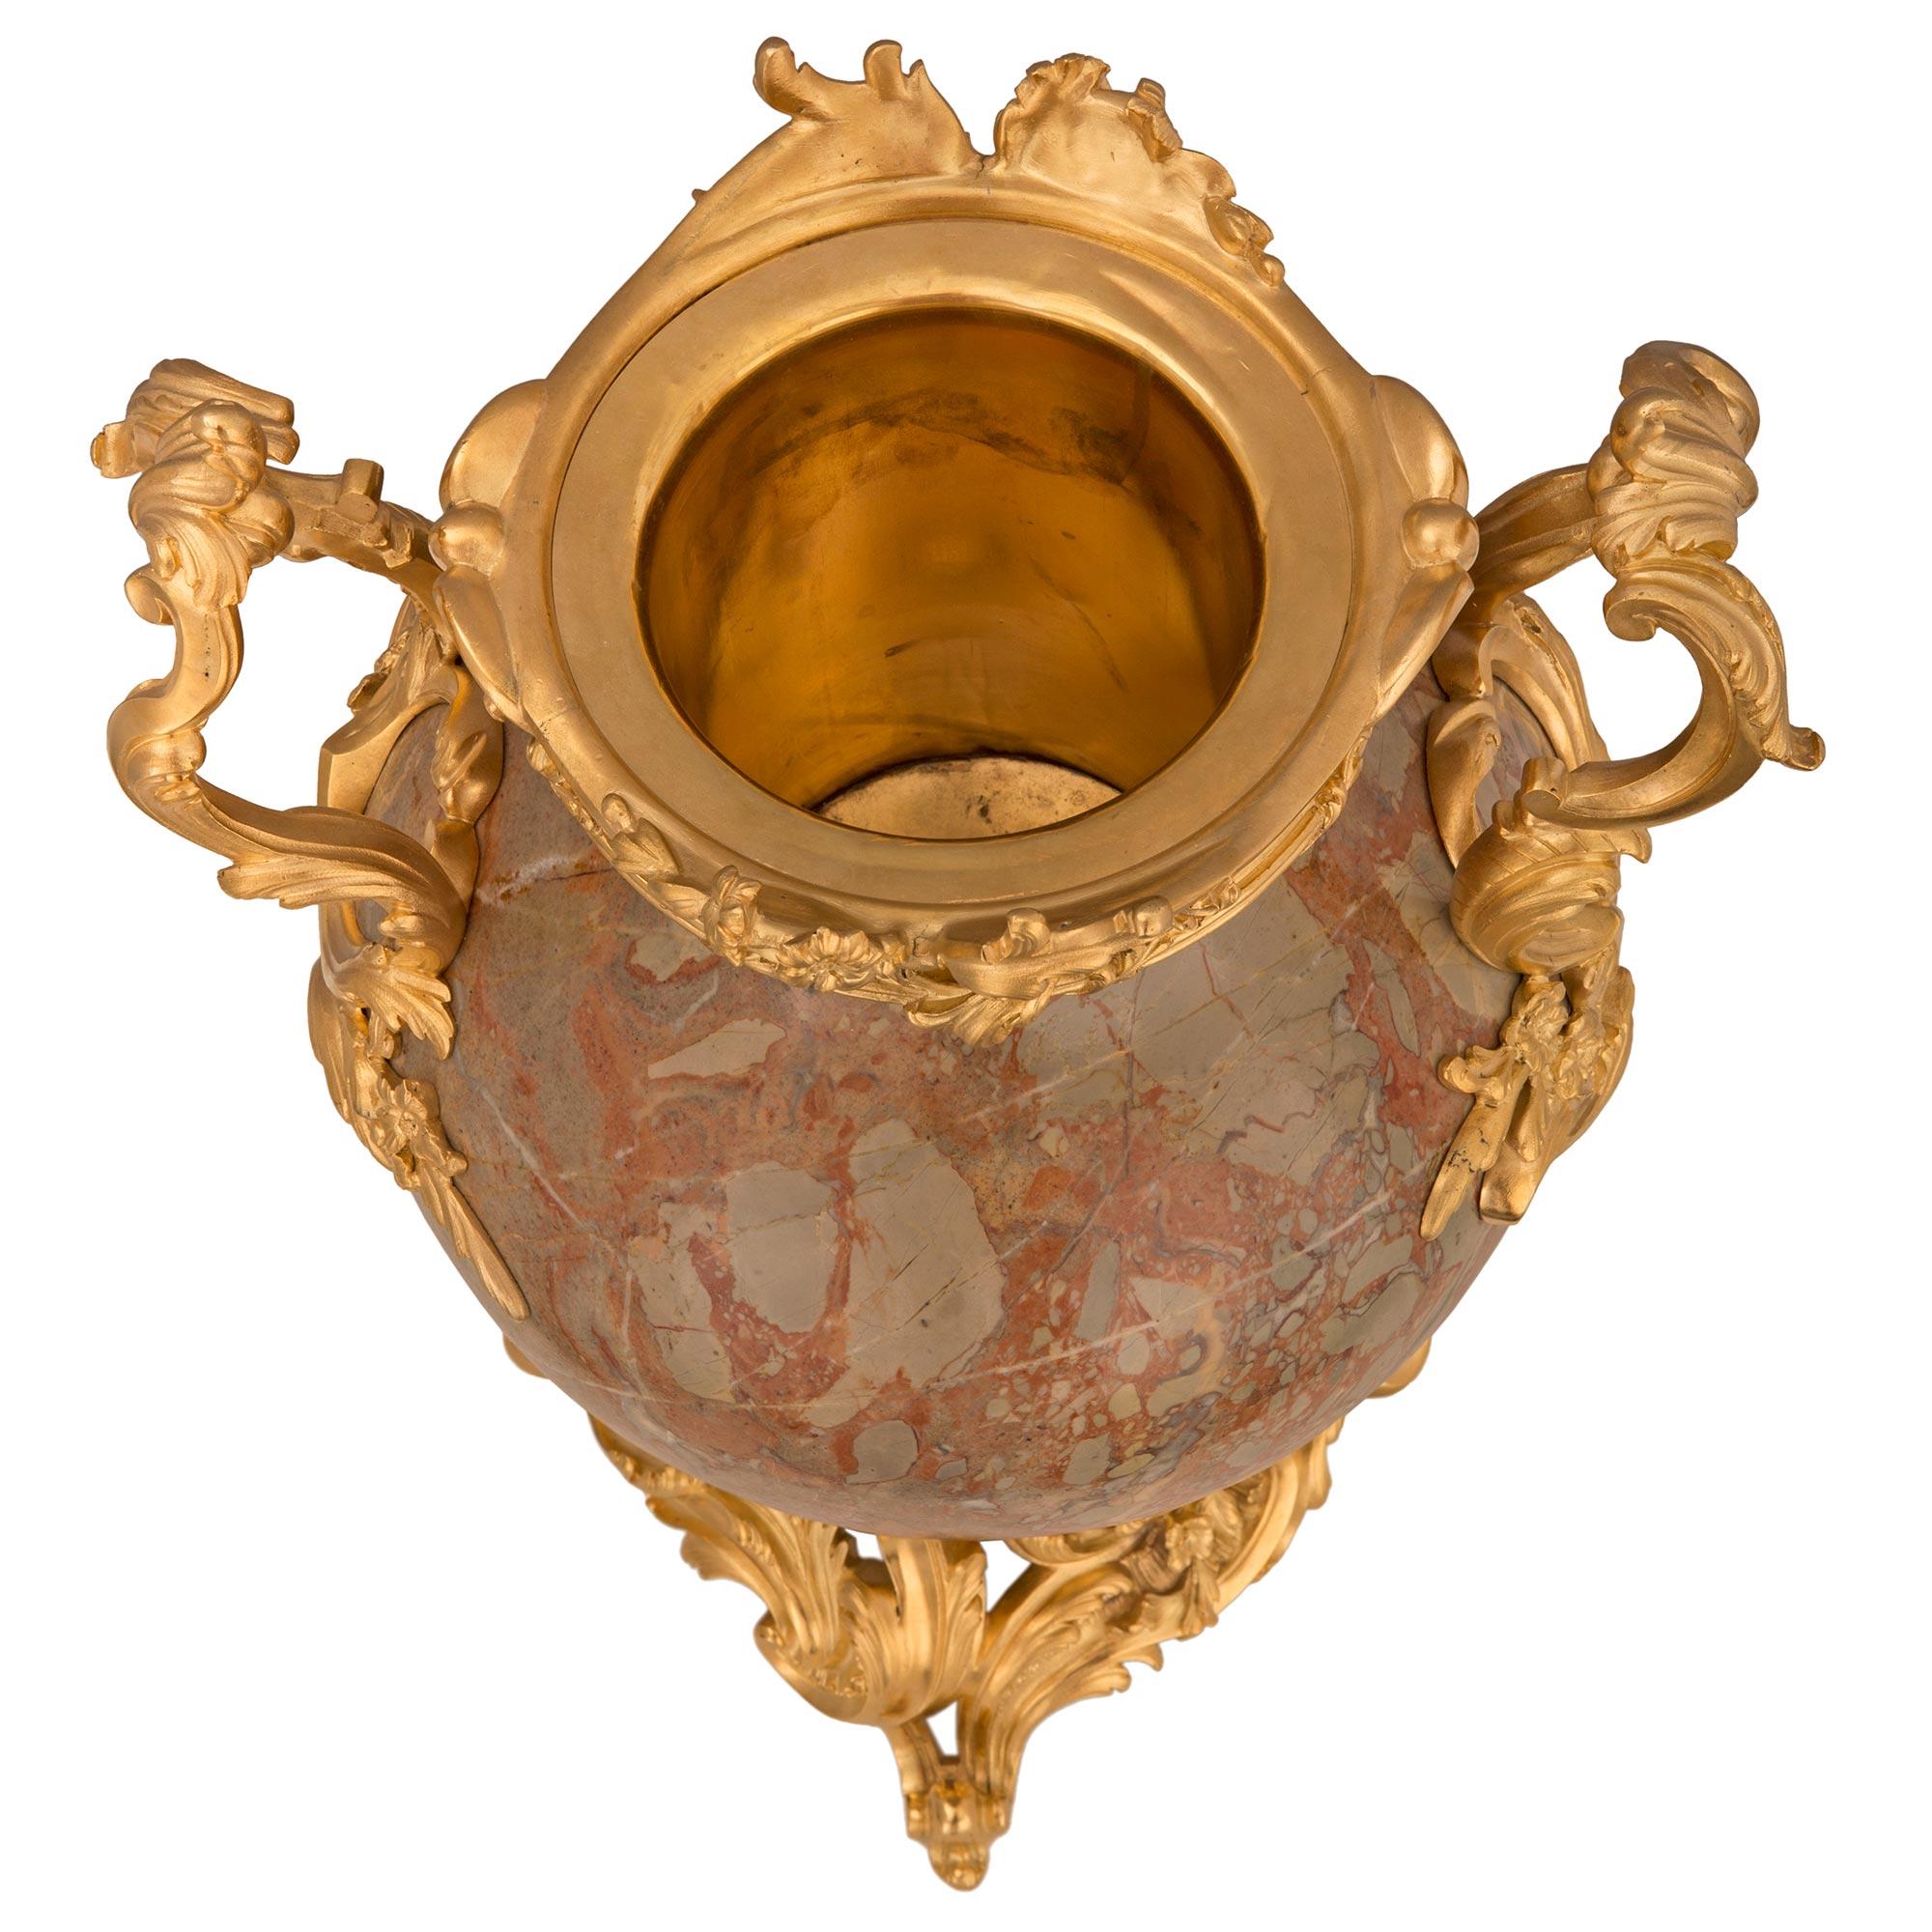 A stunning and most impressive pair of French 19th century Louis XV st. ormolu and Sarrancolin marble lidded urns. Each urn is raised by a beautiful pierced ormolu base with exceptional richly chased scrolled foliate movements and charming